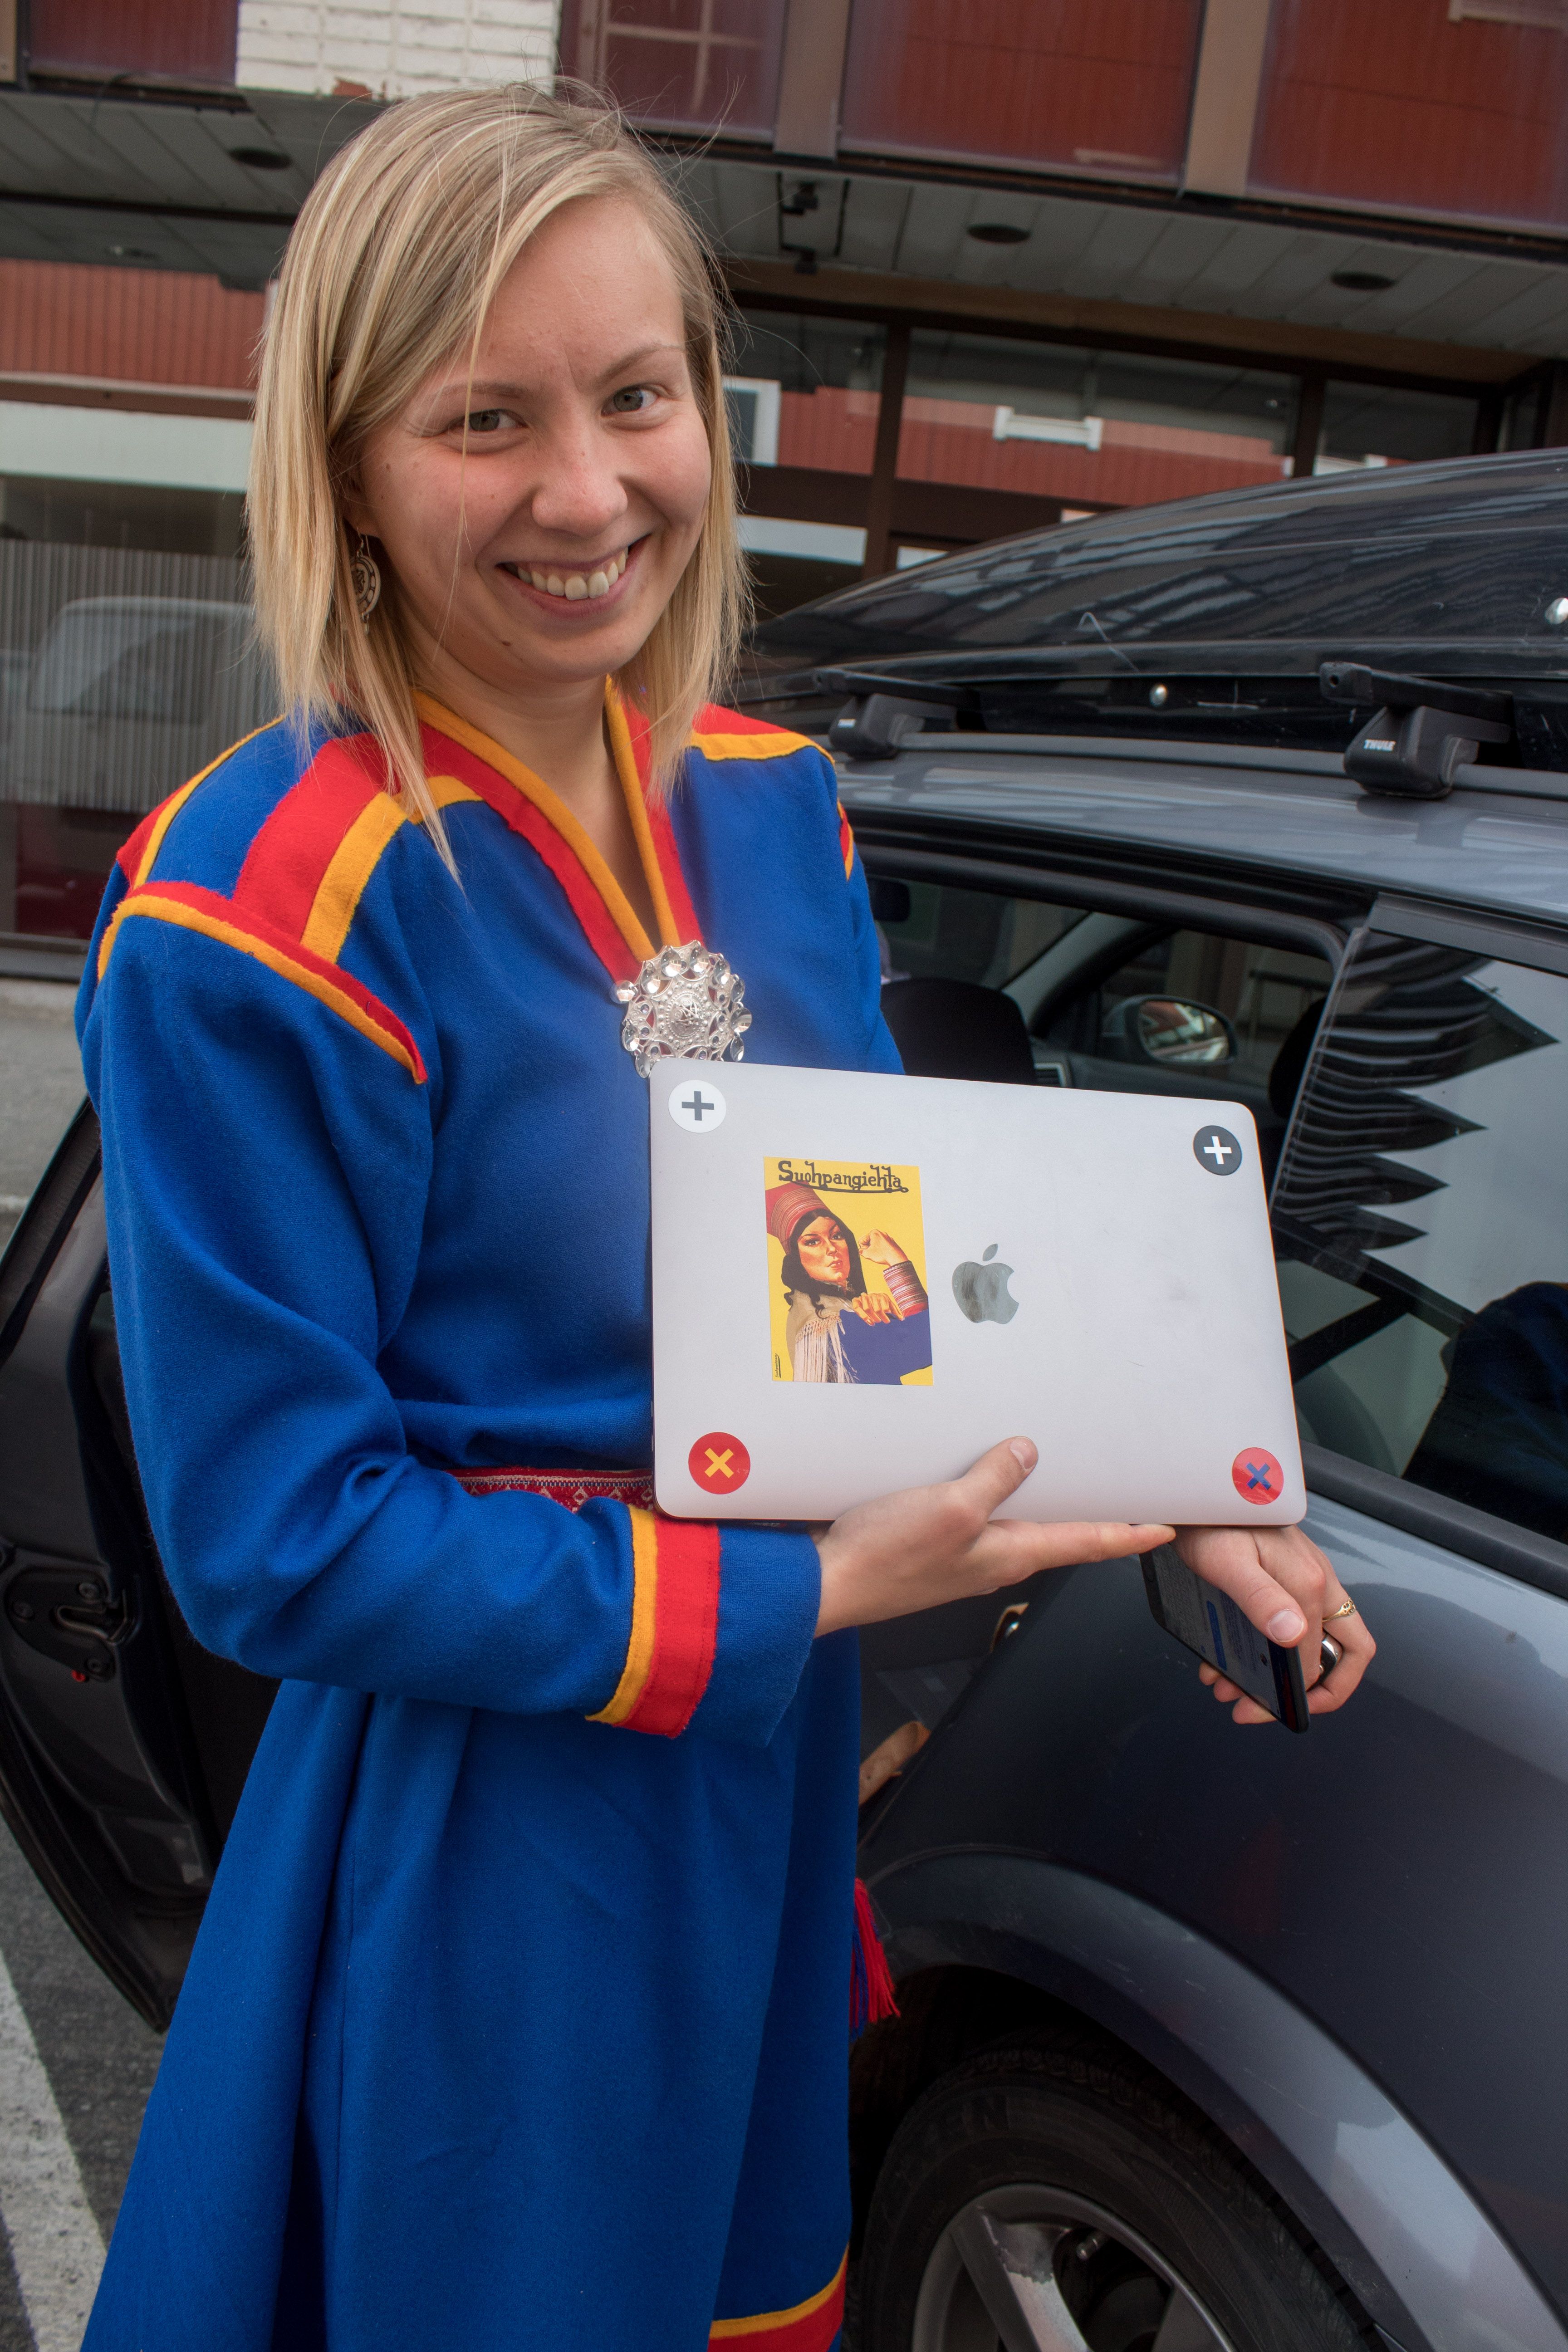 At 24, Anne Henriette Reinås Nilut is the youngest member of the Sámi Parliament of Norway. “People think that Indigenous people and Sámi people are something we read about in a history book,” she says. “But it's not." To make her point, she shows off her MacBook laptop bearing a sticker with a Sámi version of Rosie the Riveter. Image by Amy Martin. Norway, 2018.